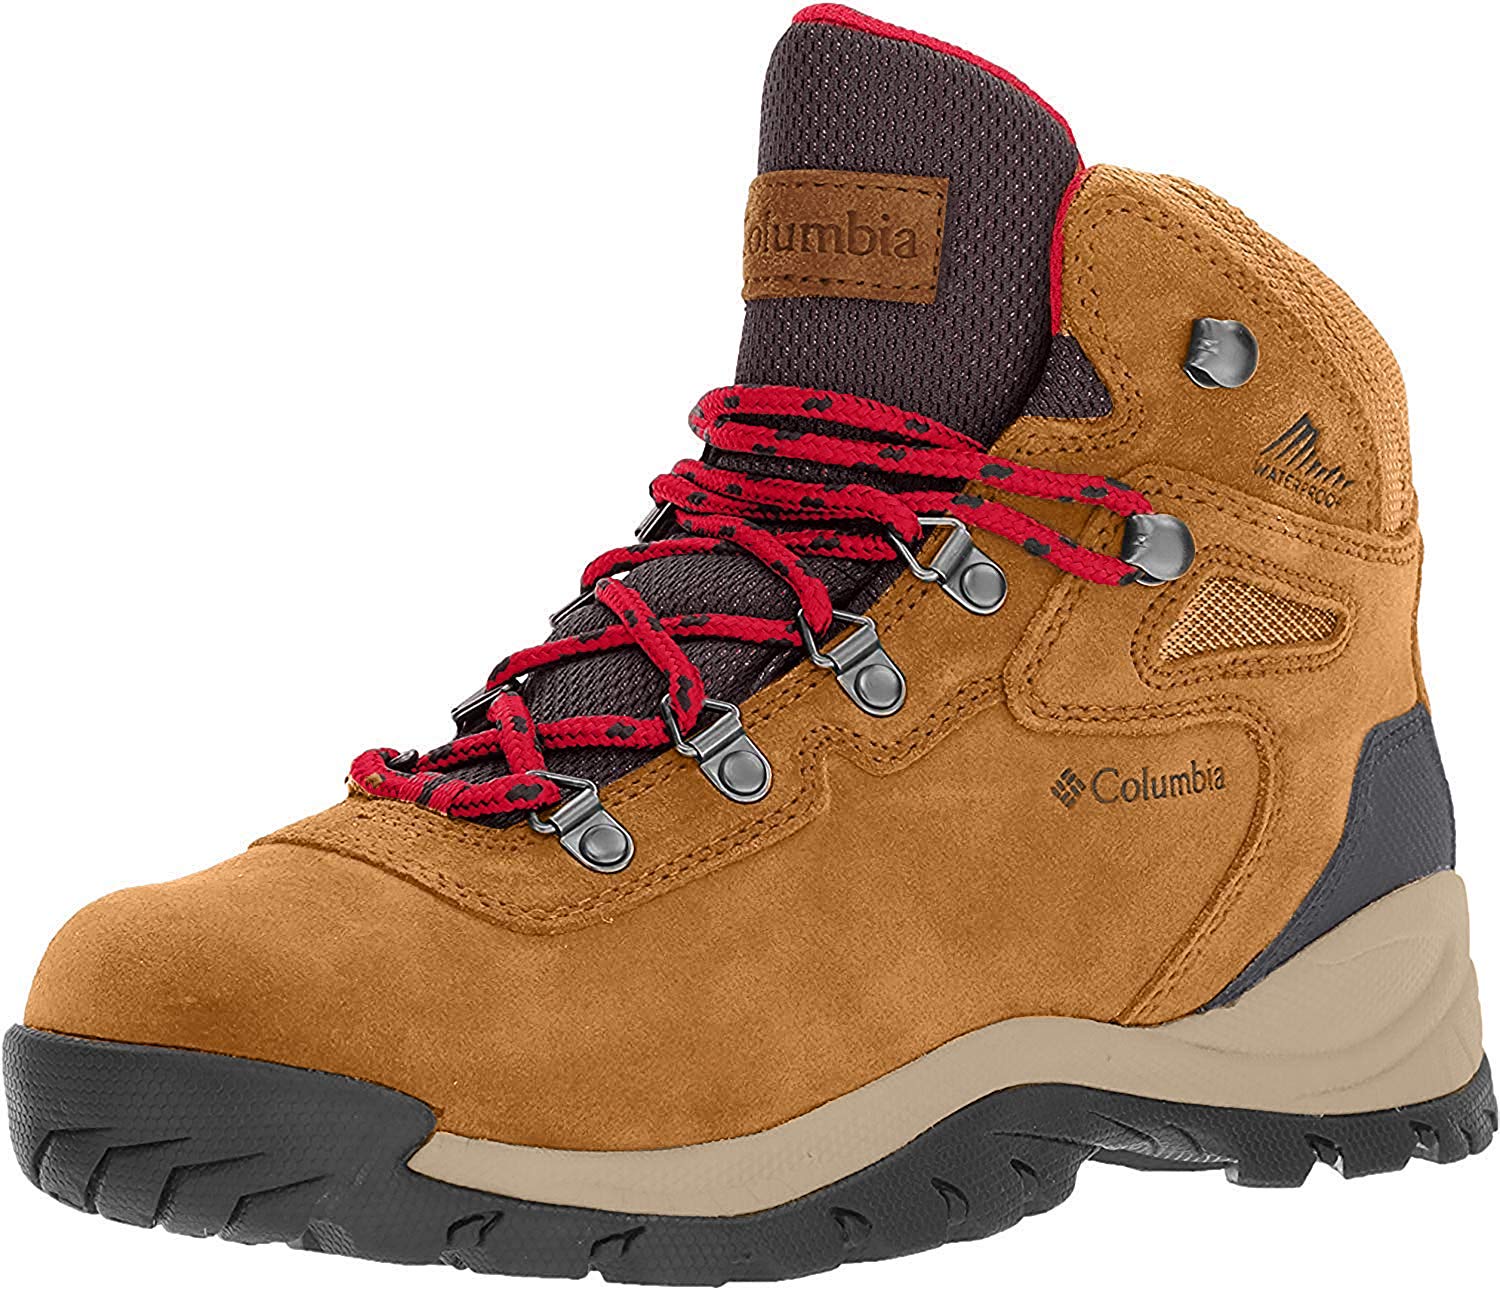 most fashionable hiking boots